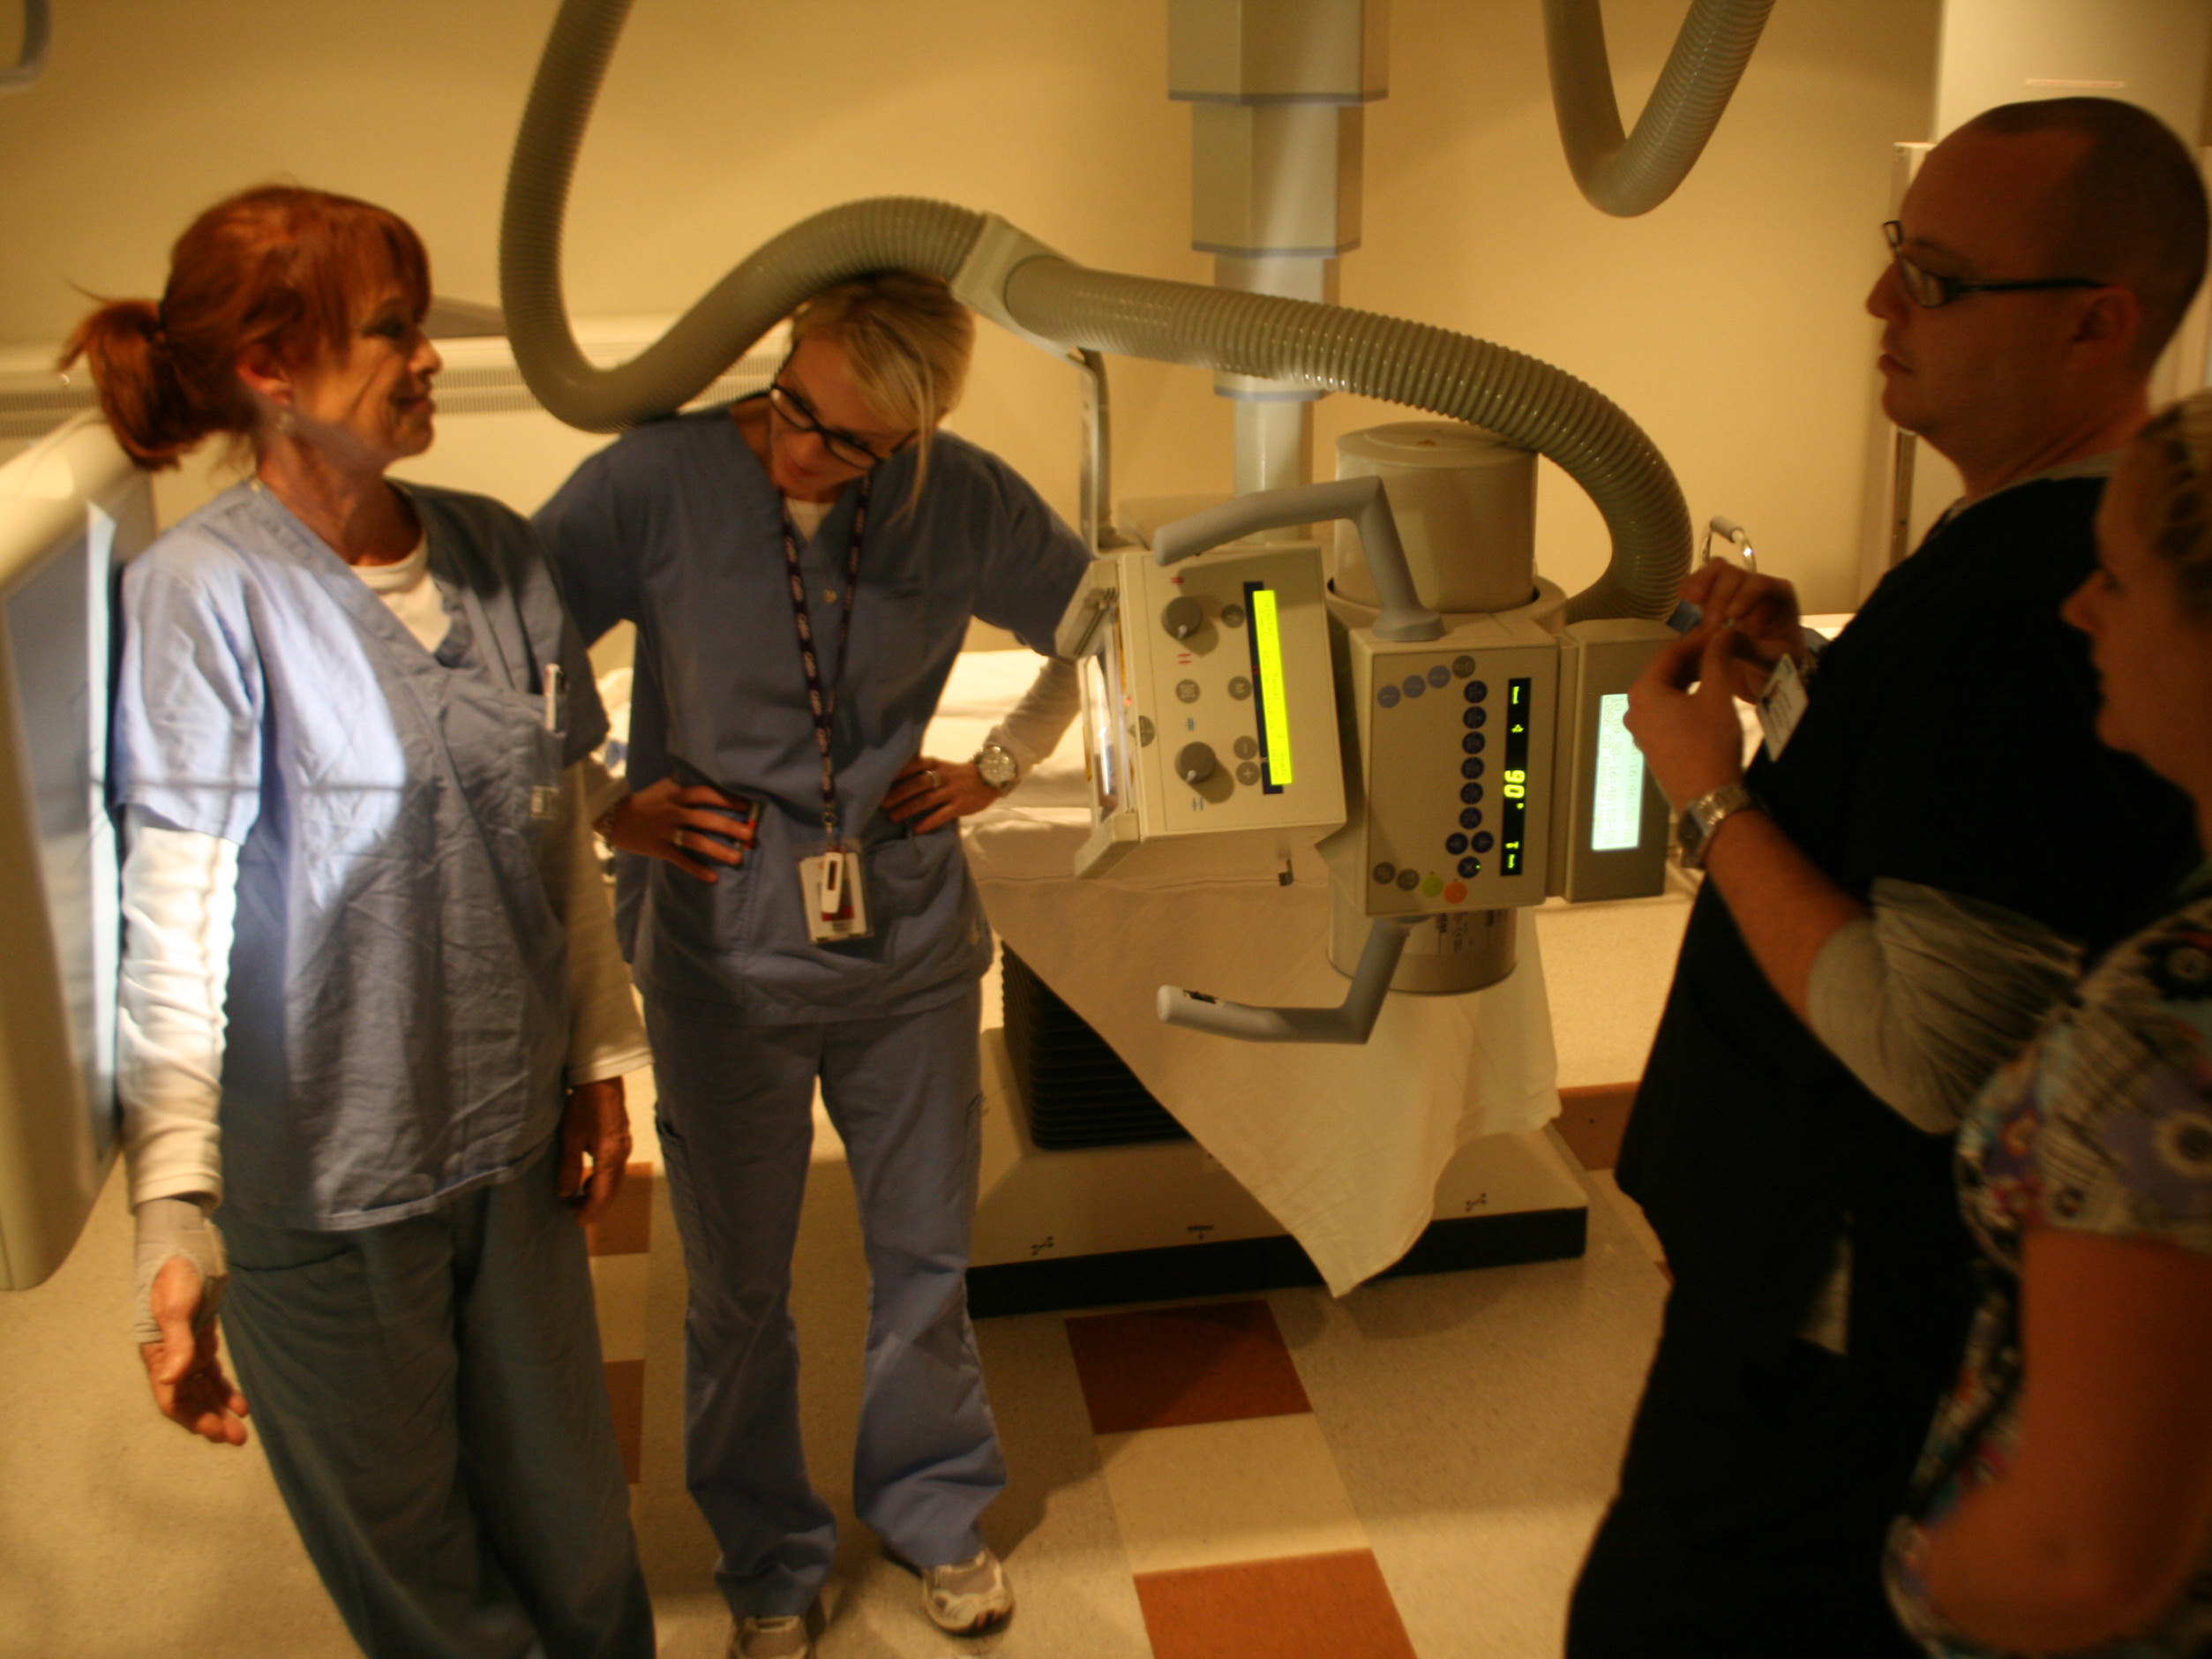 Medical Radiation Technology photo - students taking an X-ray with the equipment, hospital location